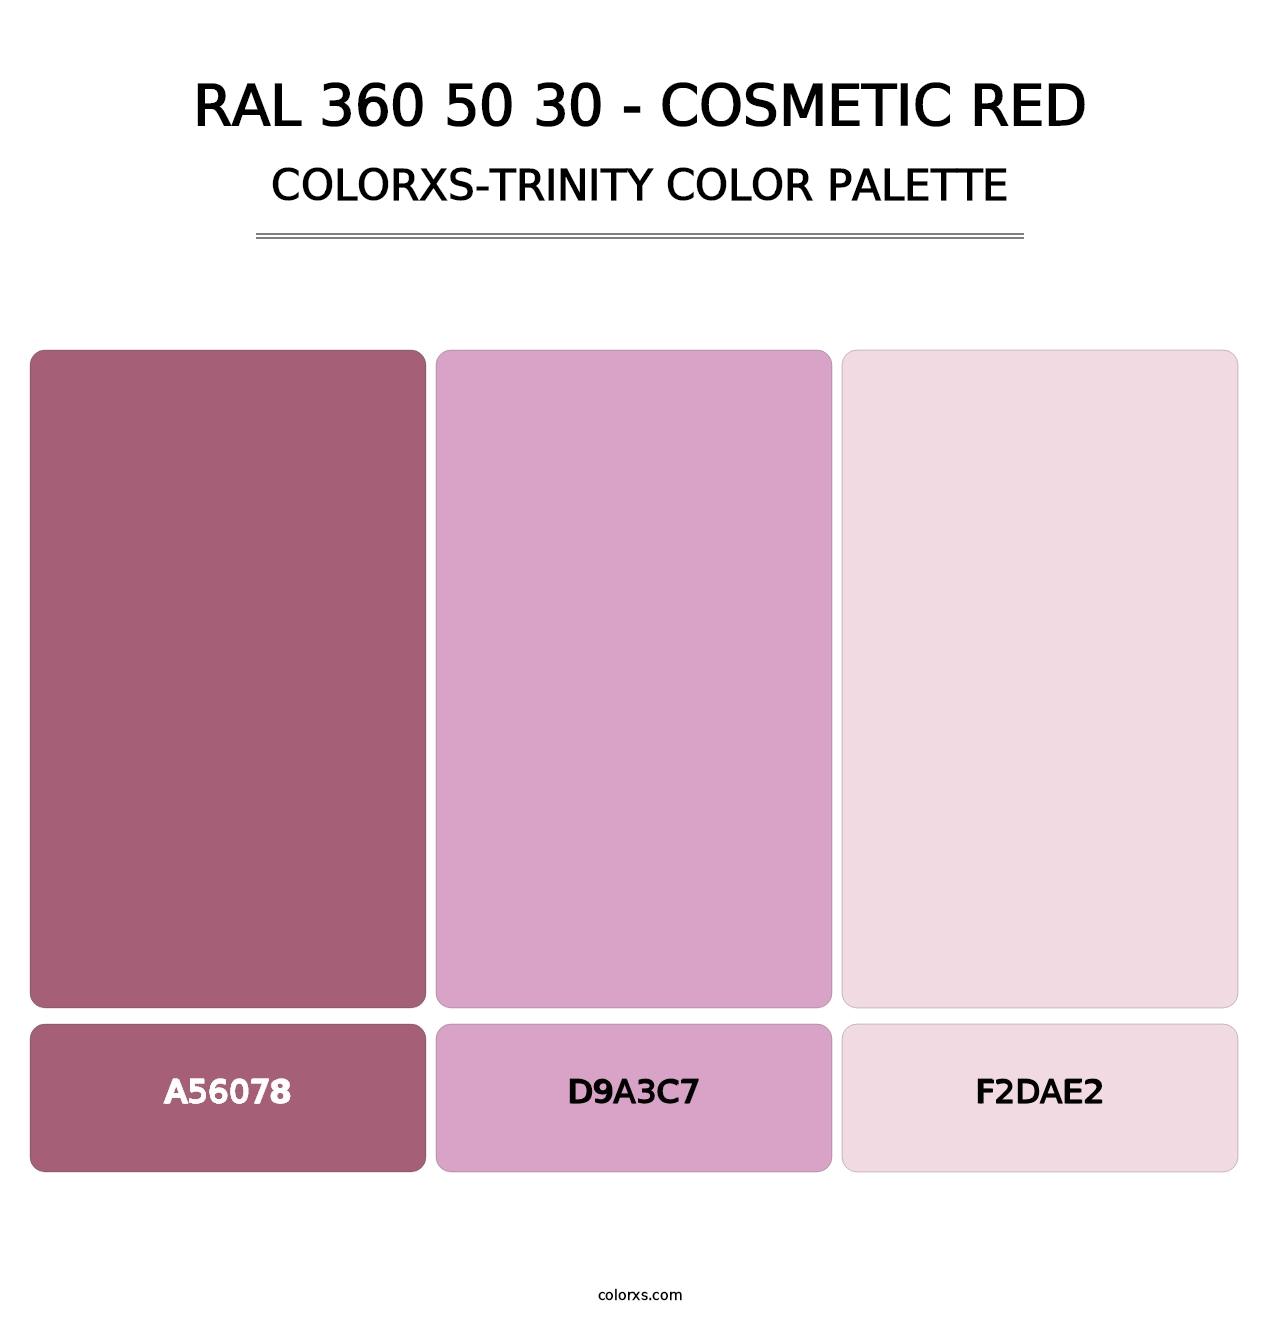 RAL 360 50 30 - Cosmetic Red - Colorxs Trinity Palette